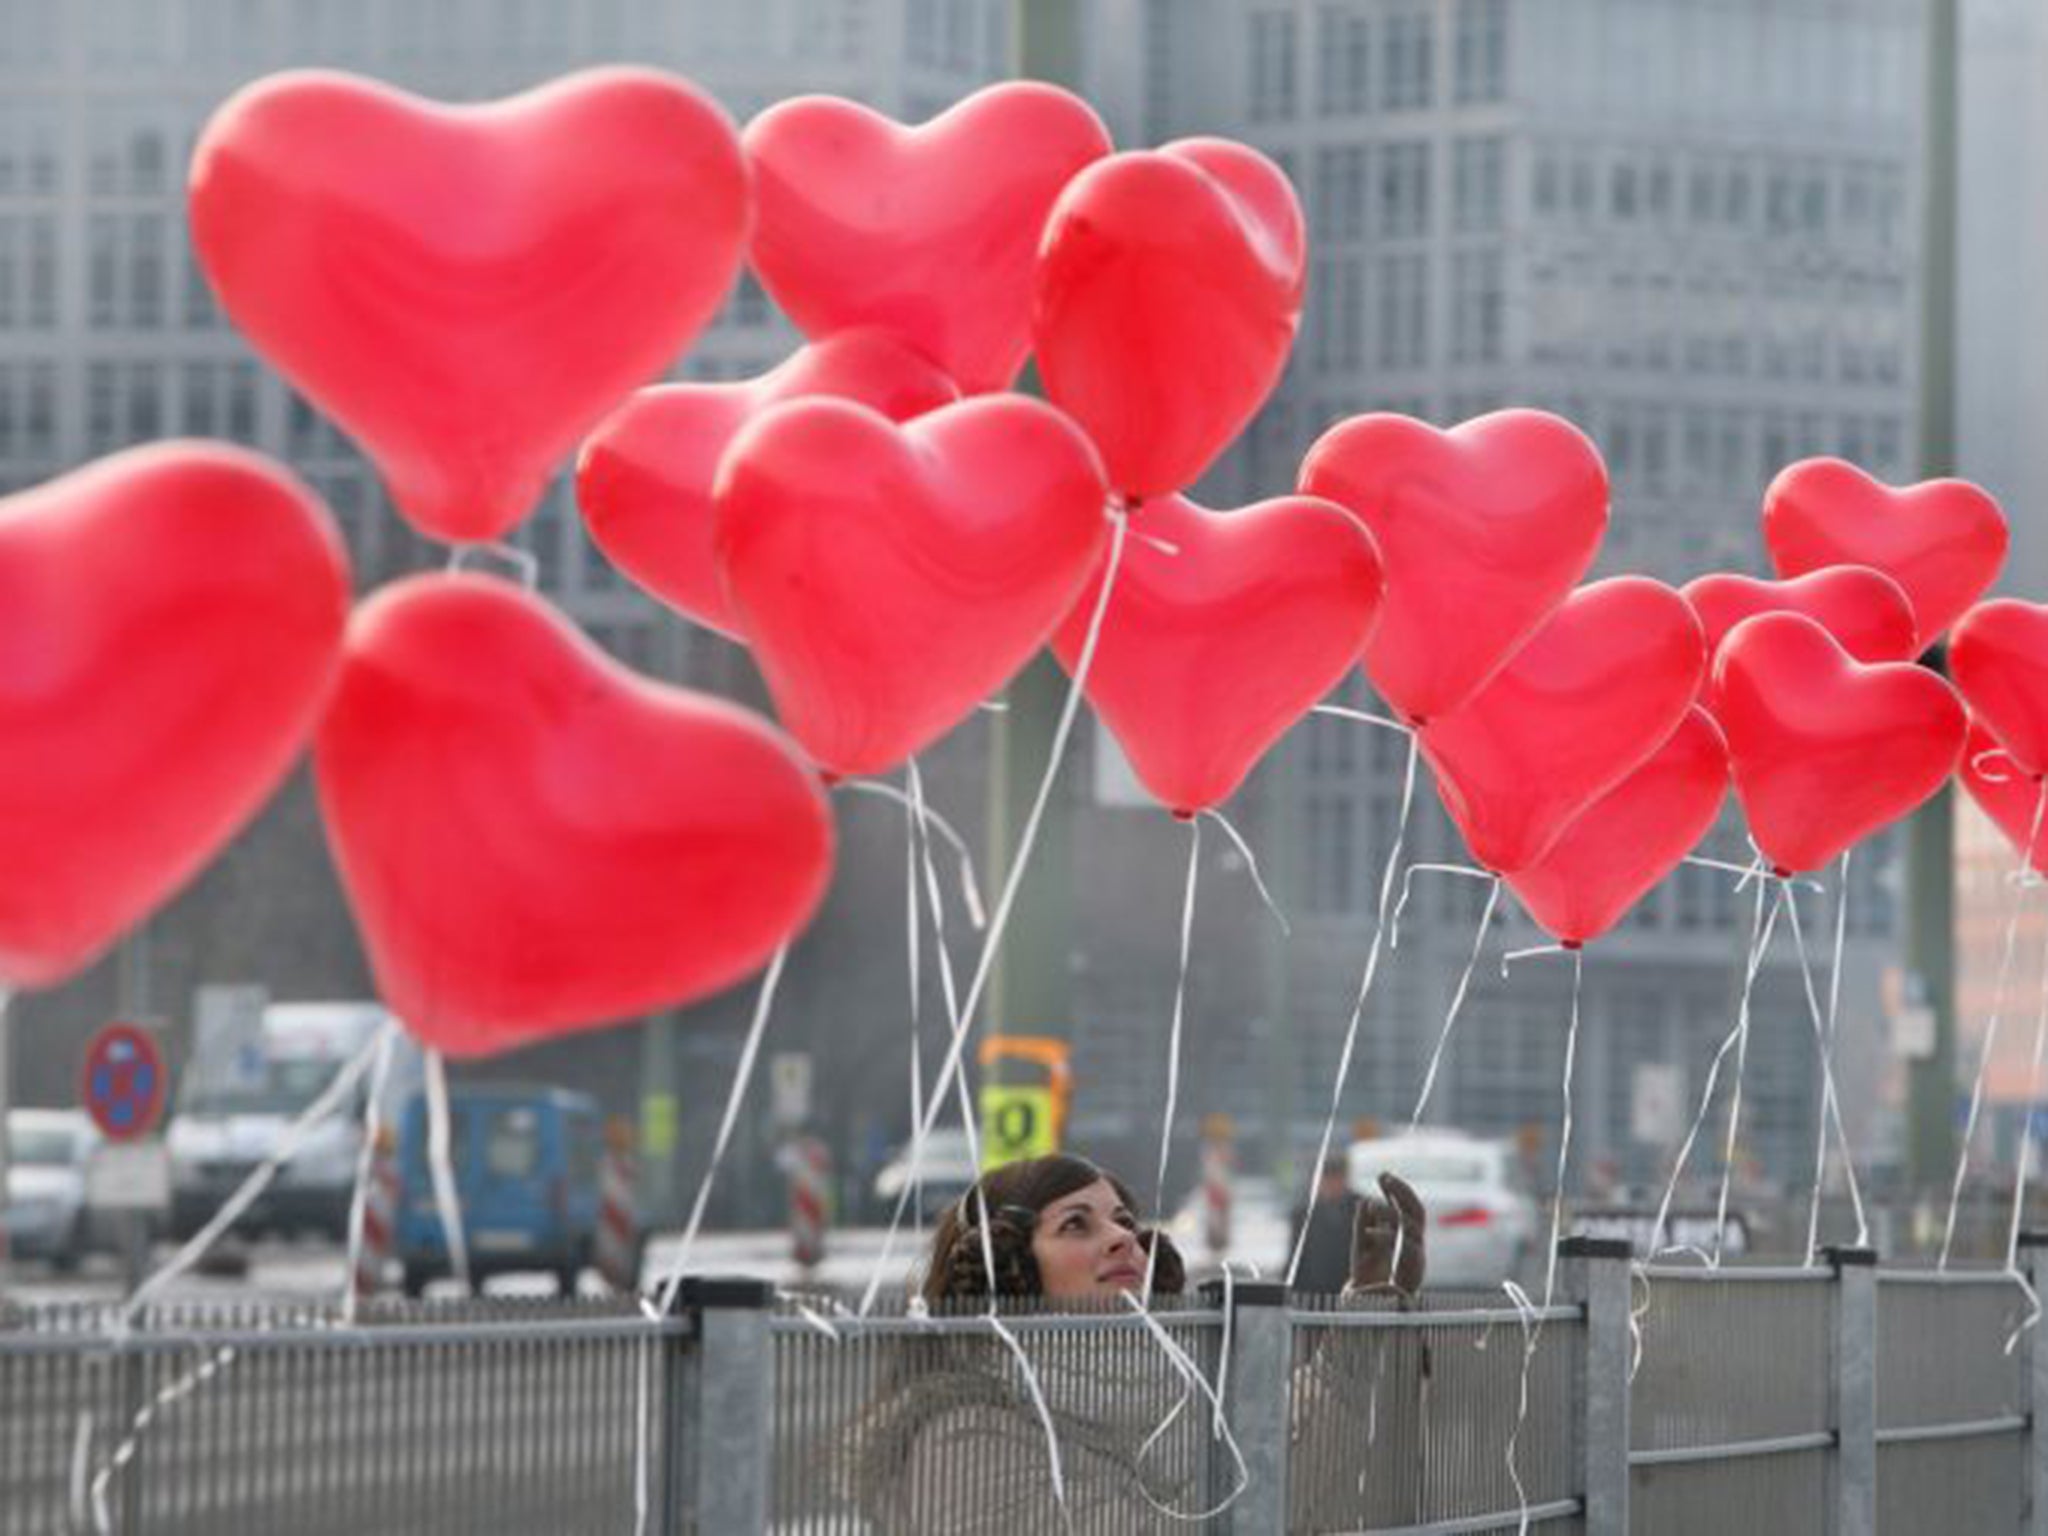 One dating agency, Mutual Attraction, is currently advertising for a “professional Cupid” (AFP/Getty)